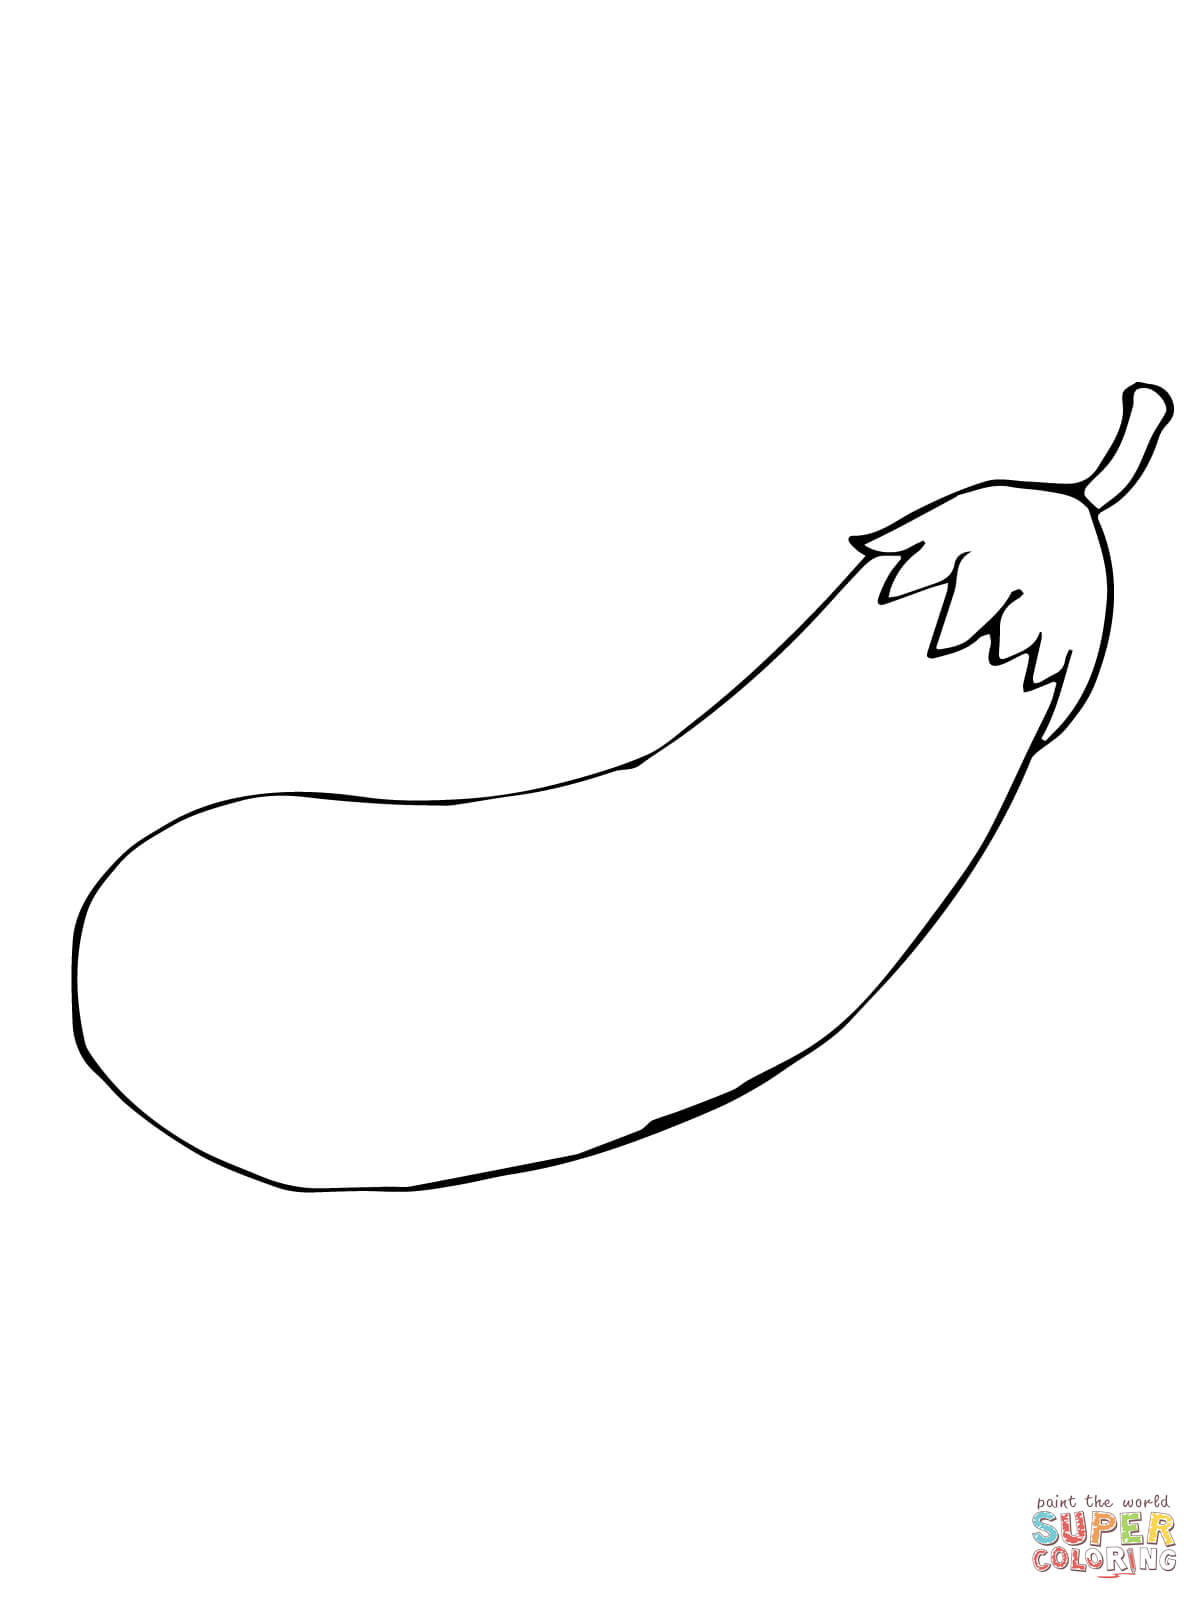 Eggplant coloring pages | Free Coloring Pages